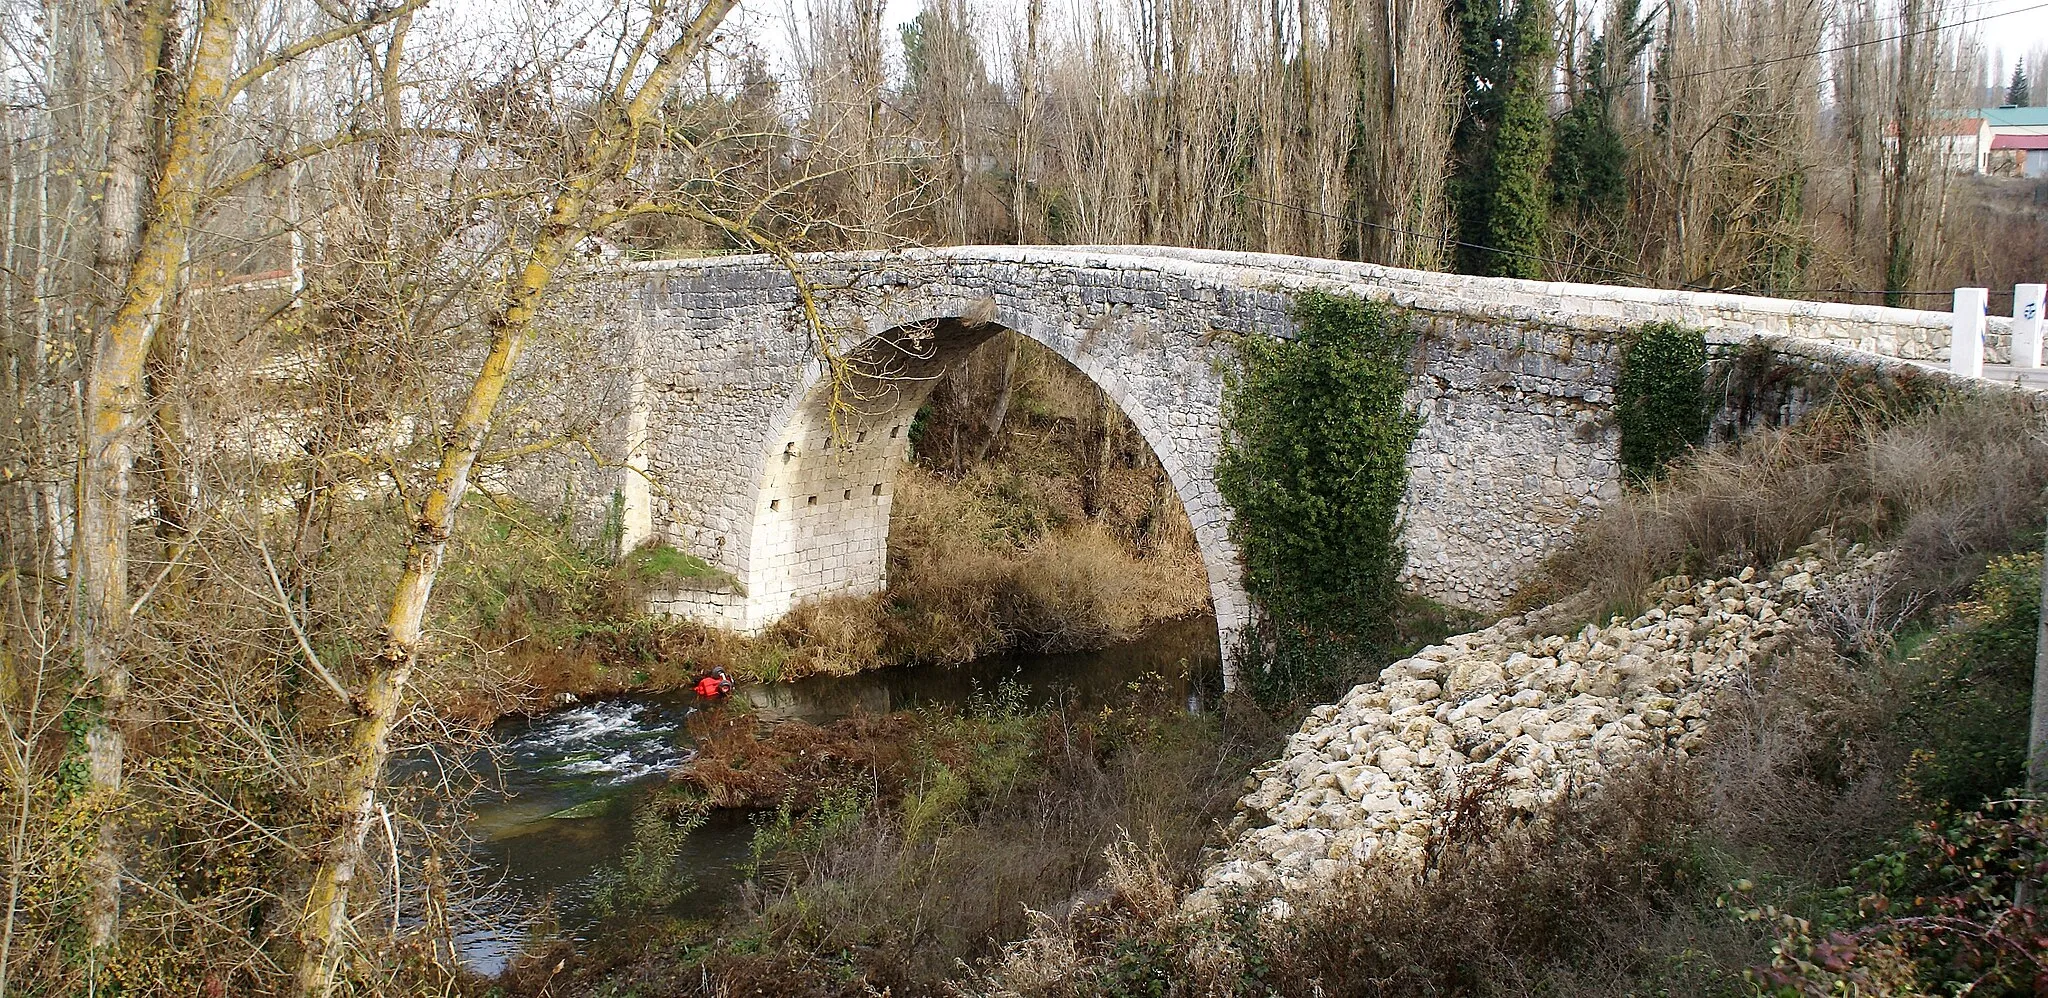 Photo showing: Bridge over the Cega River in Megeces, Valladolid, Spain.